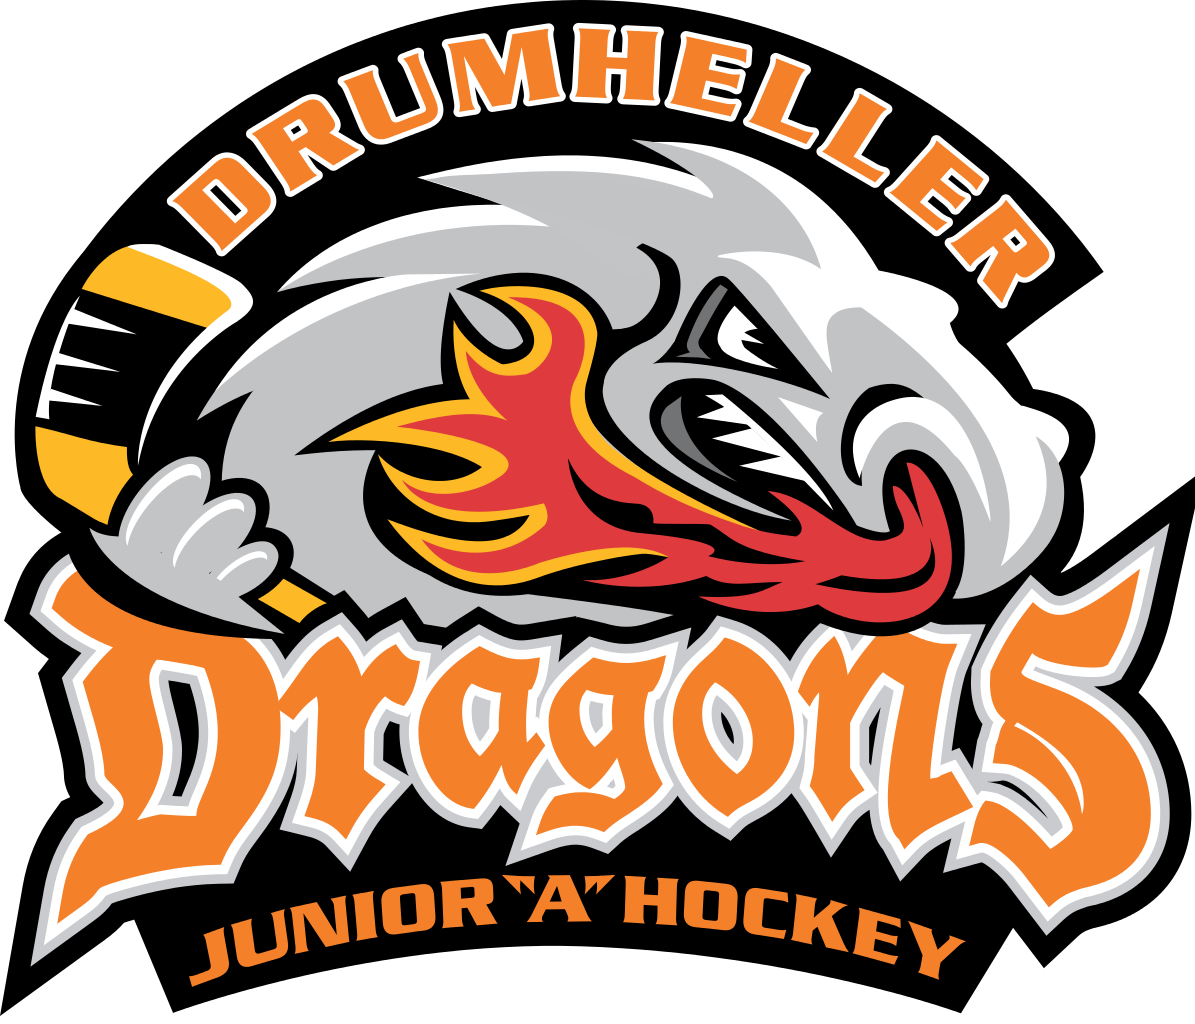 The Drumheller Dragons AJHL hockey team commit to another season of play with their schedule becoming available in 